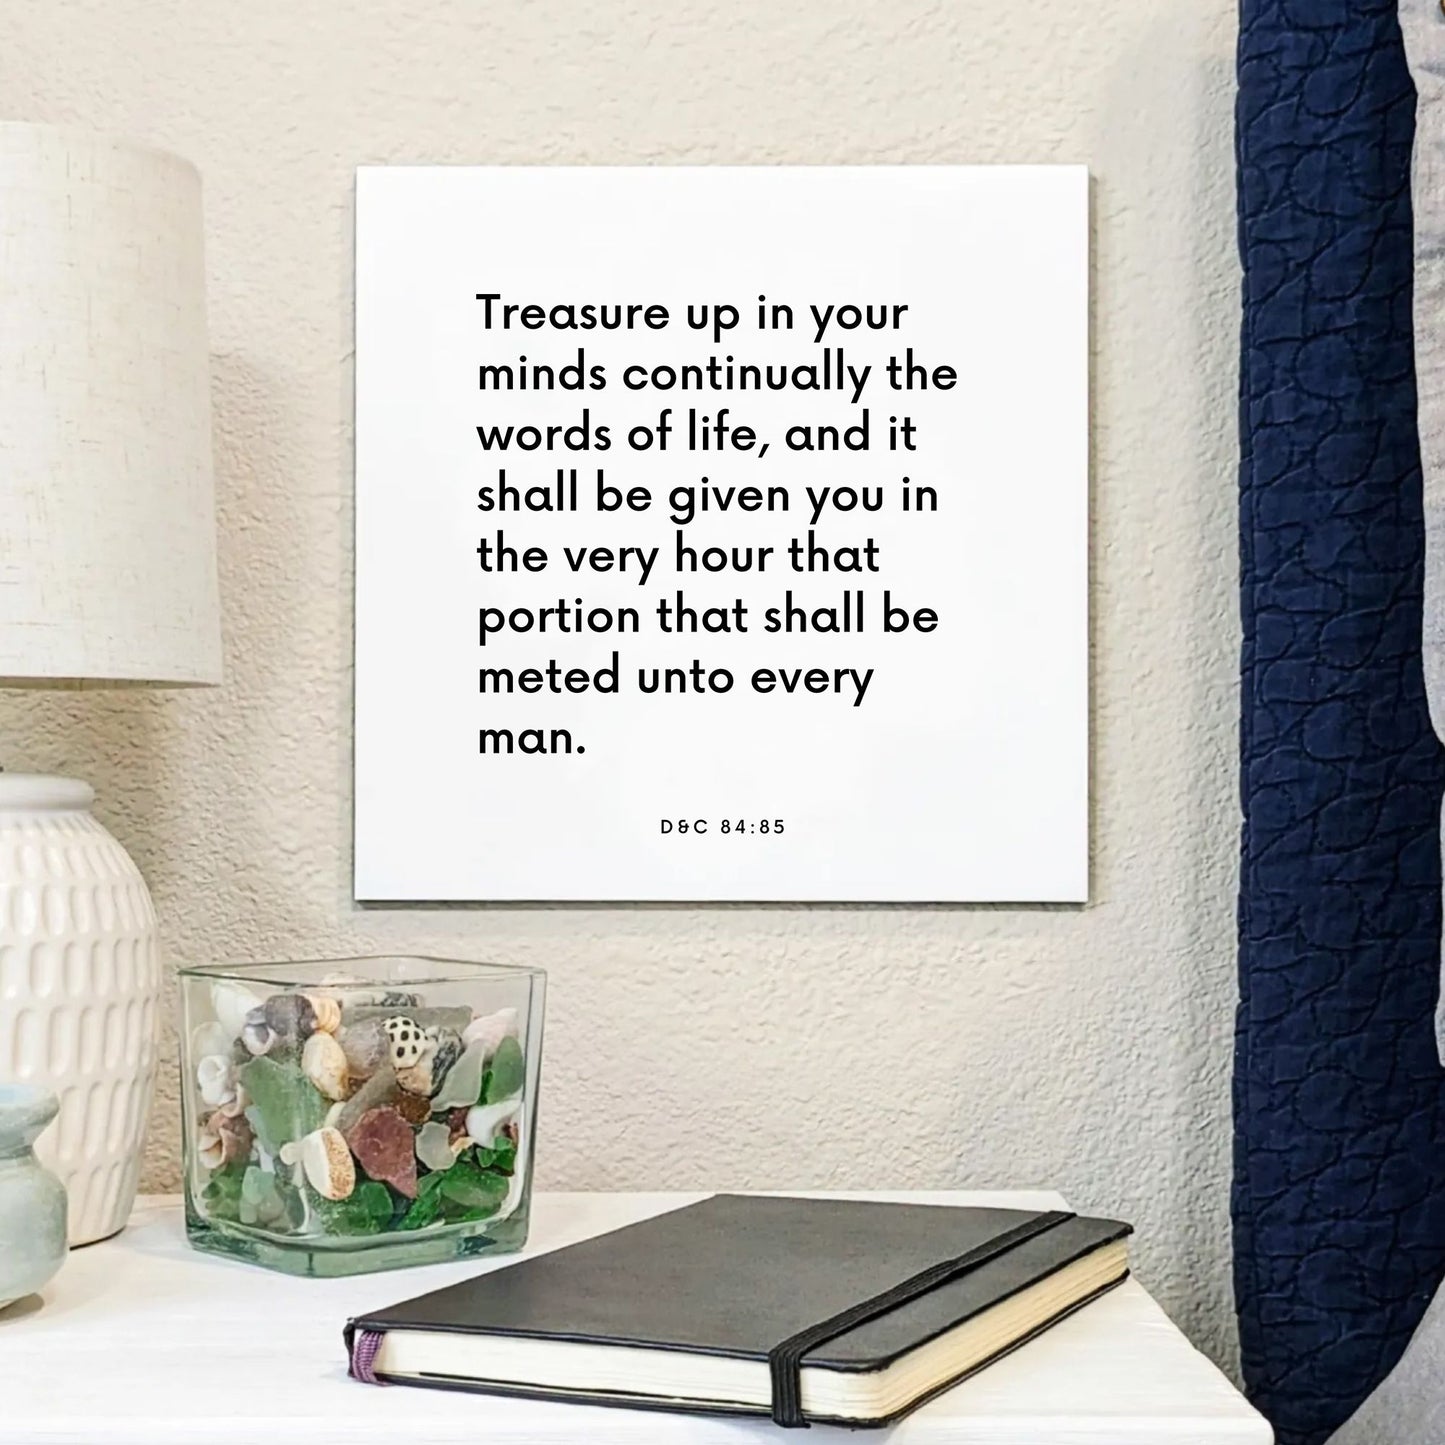 Bedside mouting of the scripture tile for D&C 84:85 - "Treasure up in your minds continually the words of life"